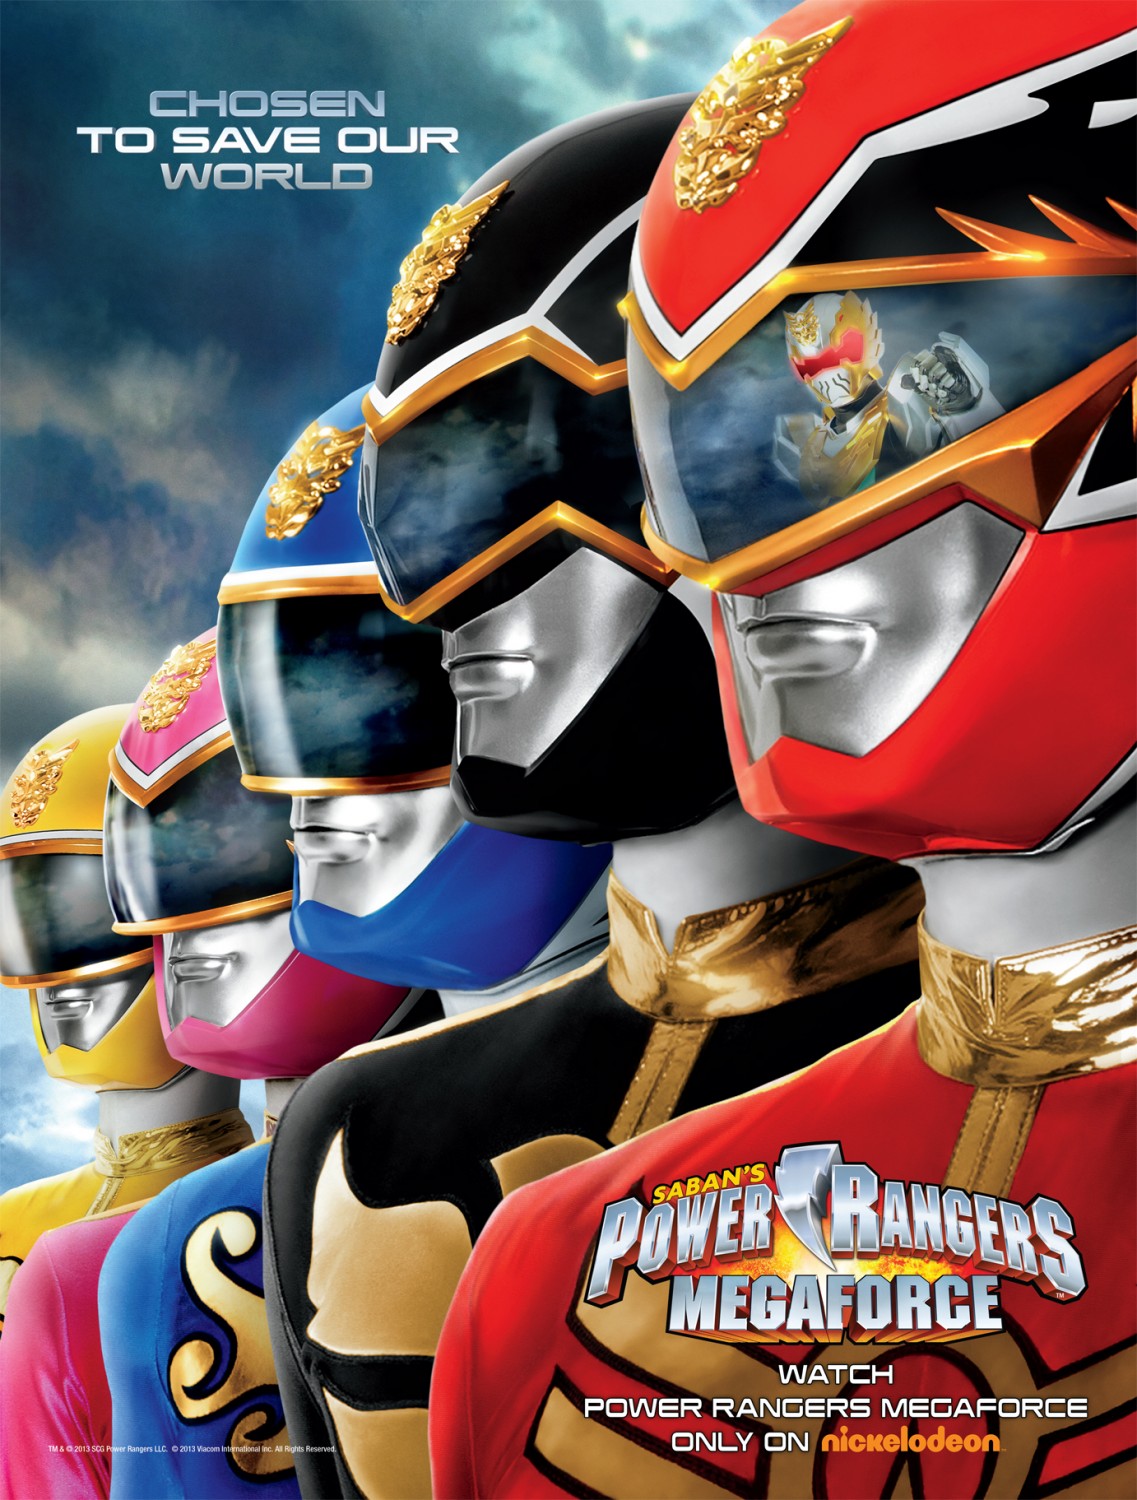 Extra Large TV Poster Image for Power Rangers Megaforce 